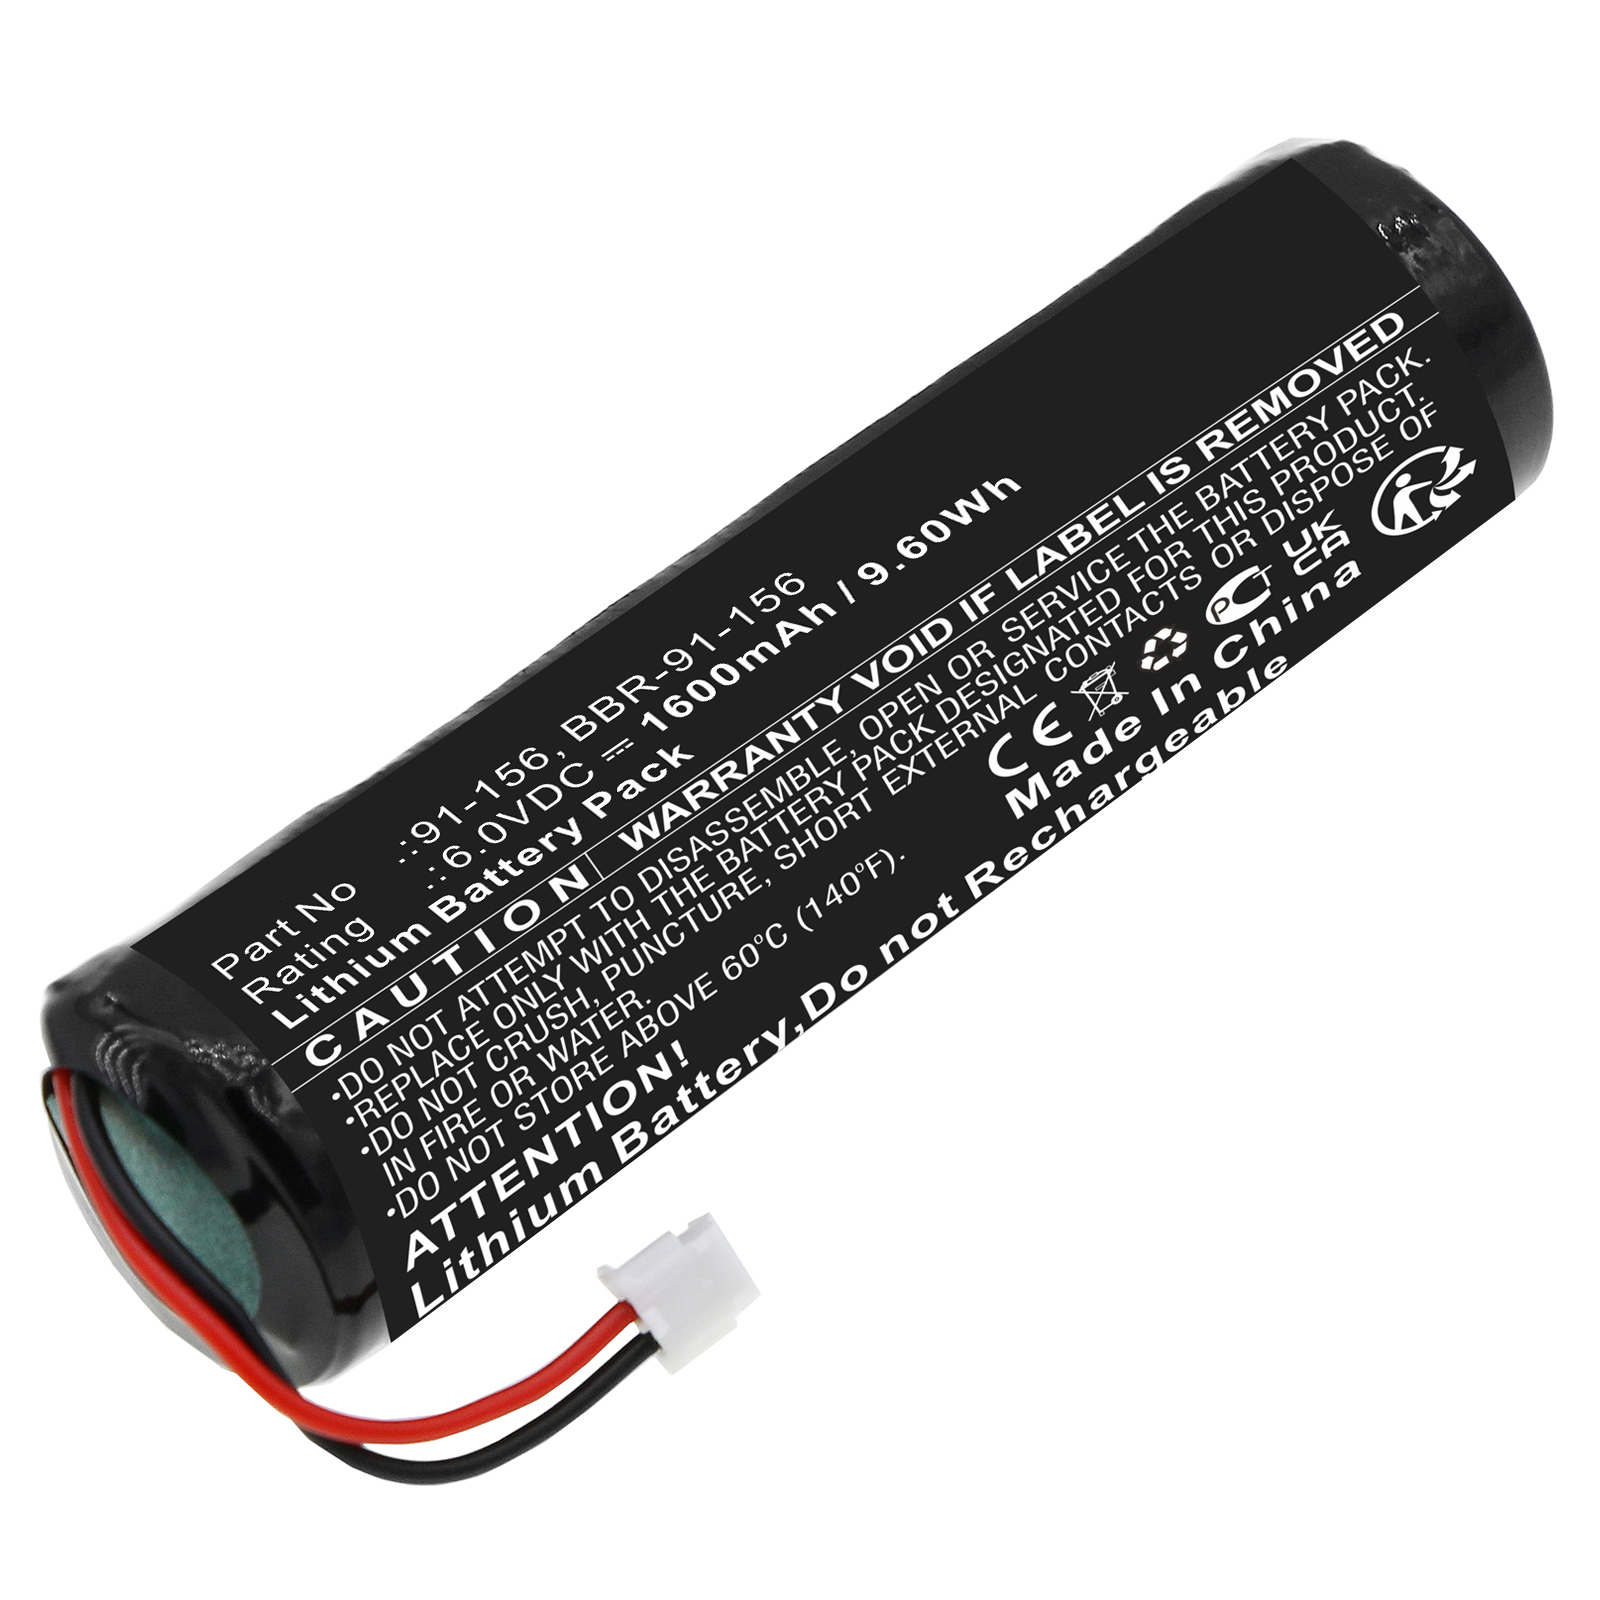 Synergy Digital Marine Safety & Flotation Devices Battery, Compatible with McMurdo BBR-91-156 Marine Safety & Flotation Devices Battery (Lithium, 6V, 1600mAh)